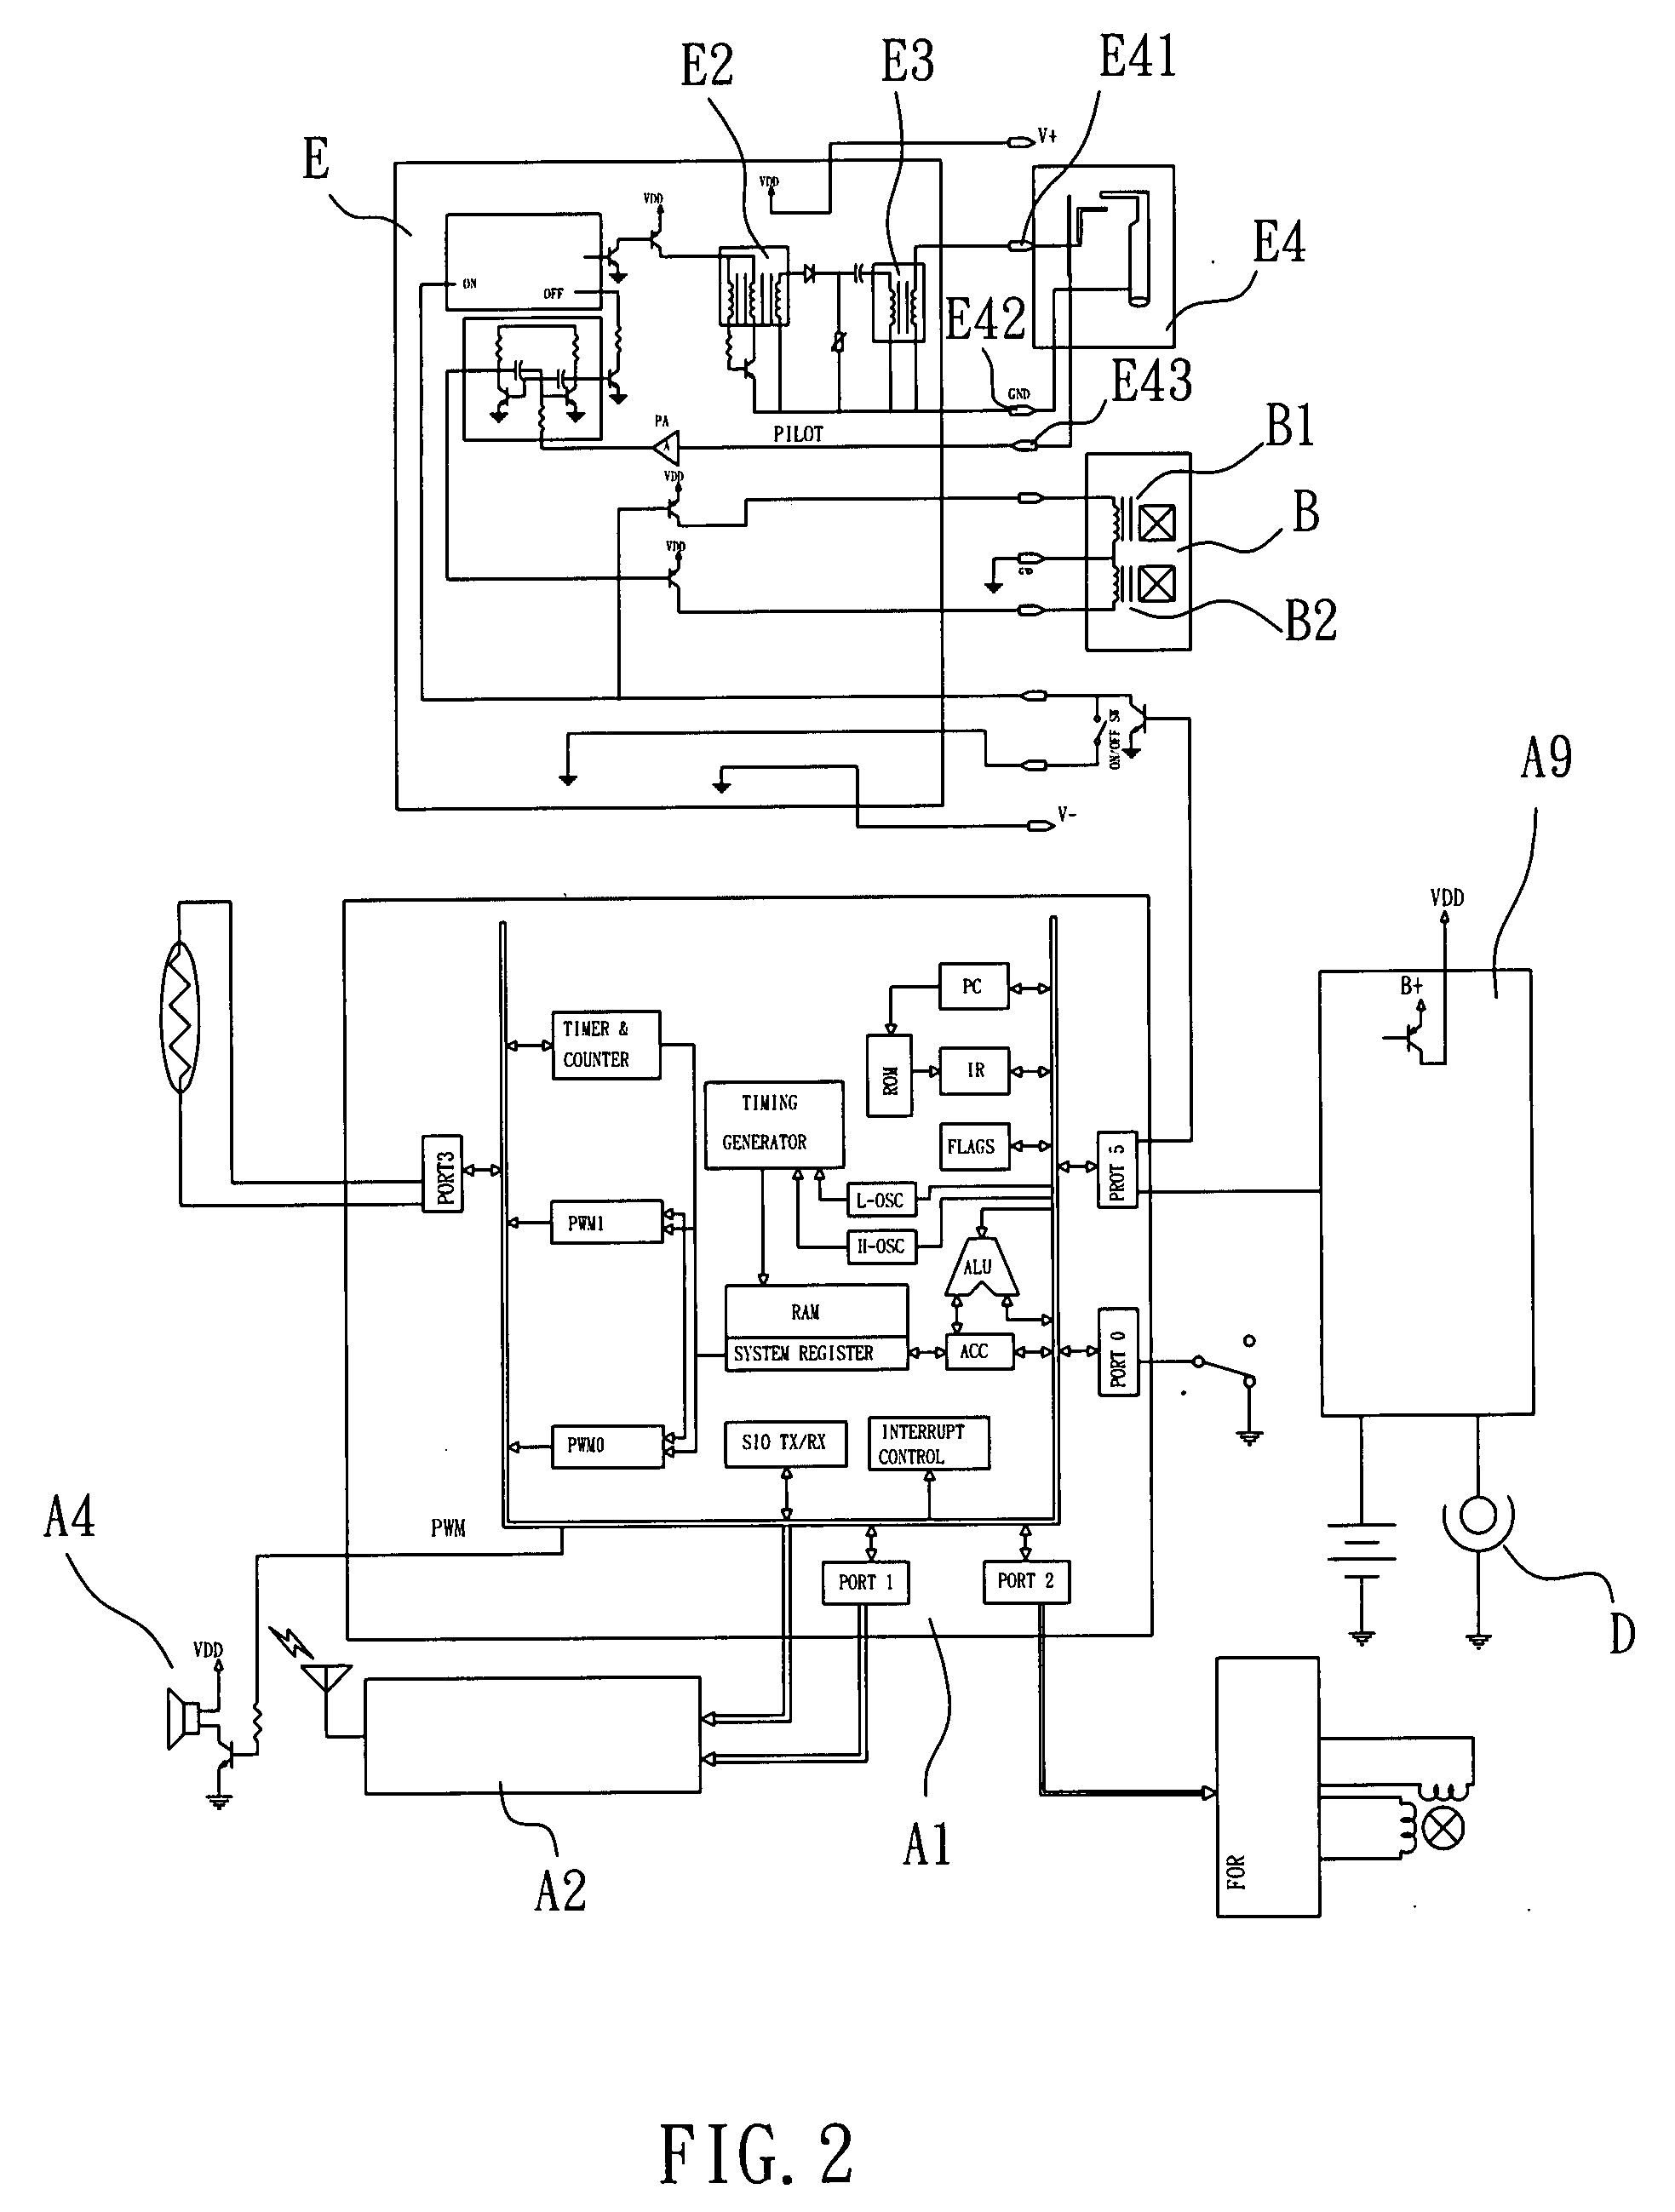 Device for remotely controlling ignition of a gas appliance by transmitting and receiving RF waves